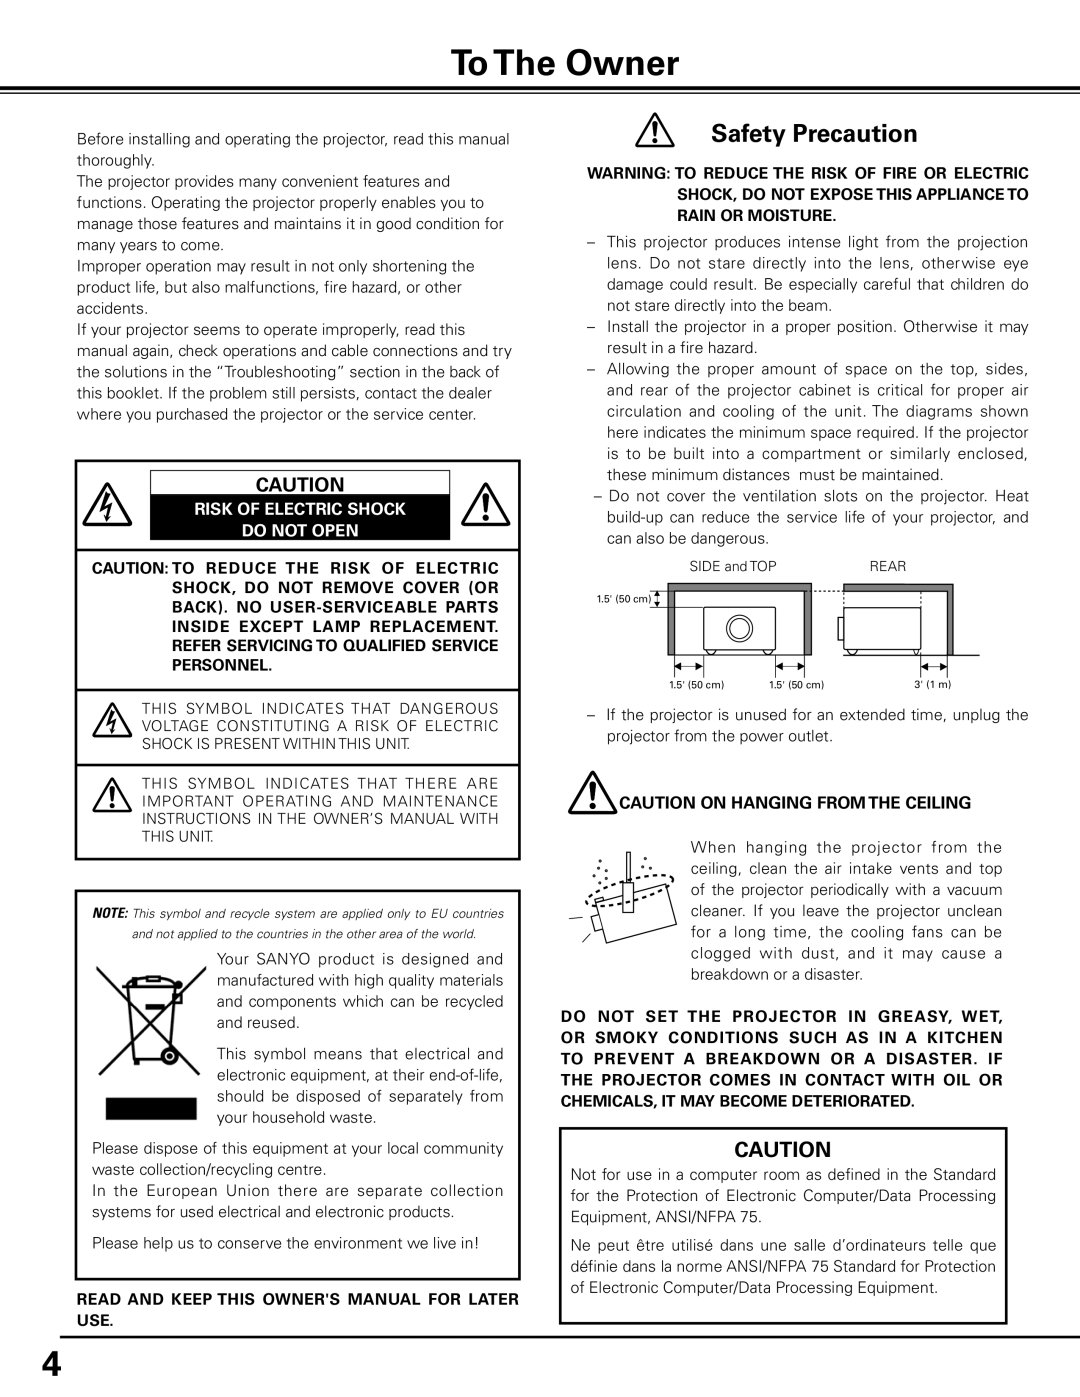 Sanyo PLC-XP100BKL, PLC-XP100L owner manual To The Owner, Safety Precaution, Risk Of Electric Shock Do Not Open 